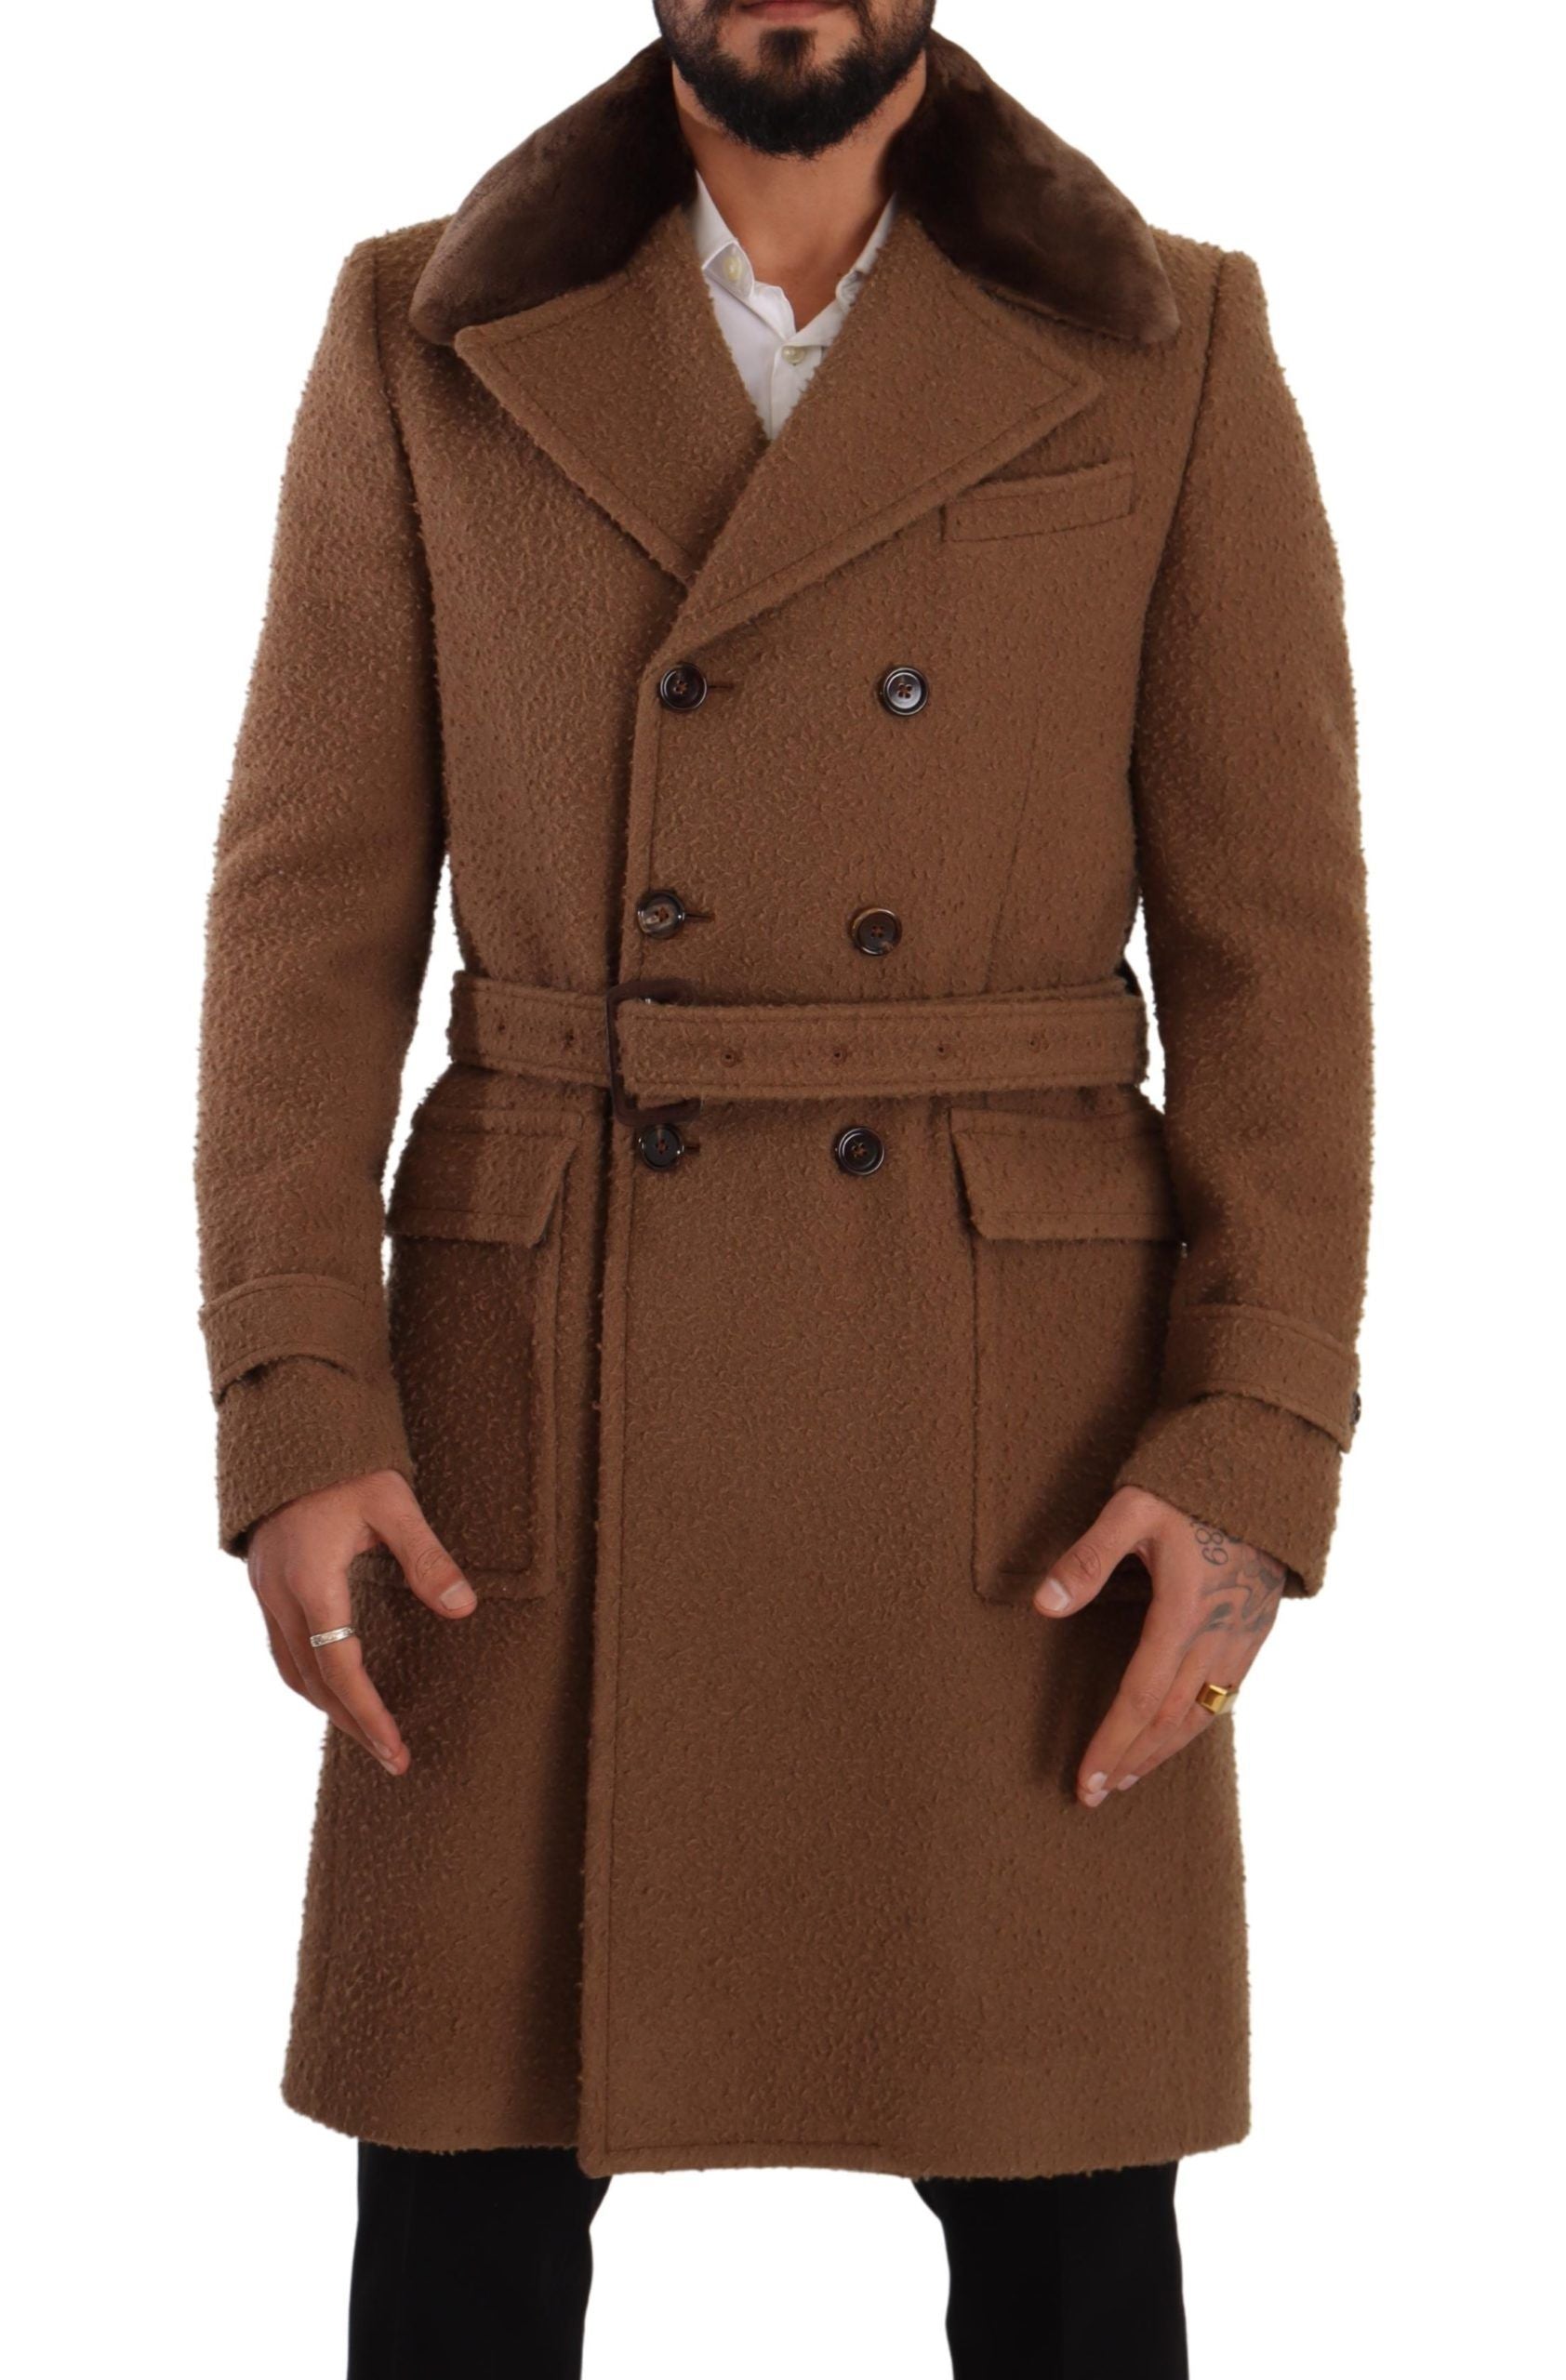 Dolce & Gabbana Brown Wool Long Double Breasted Overcoat Jacket - Gio Beverly Hills